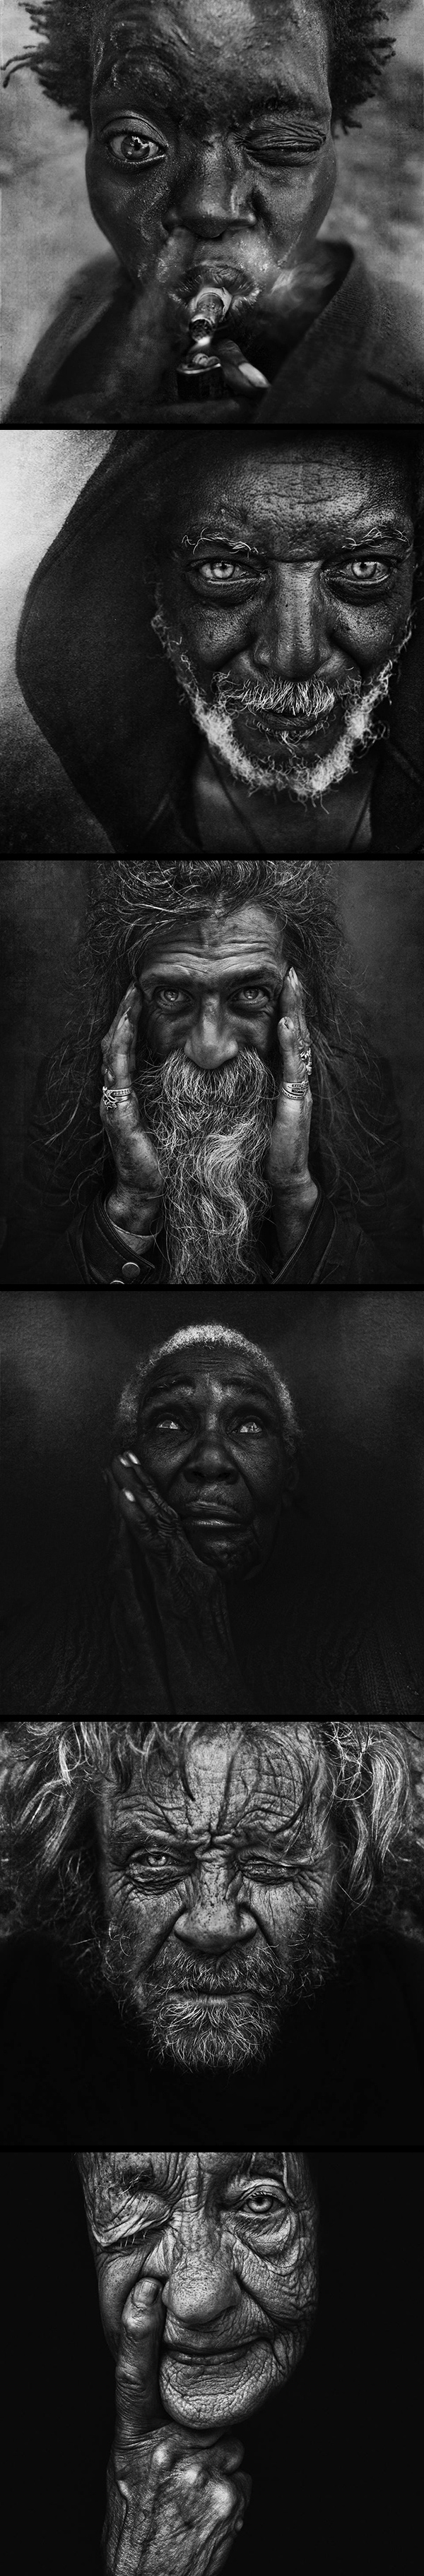 Inspirations graphiques photographie : Lee Jeffries | Homeless 